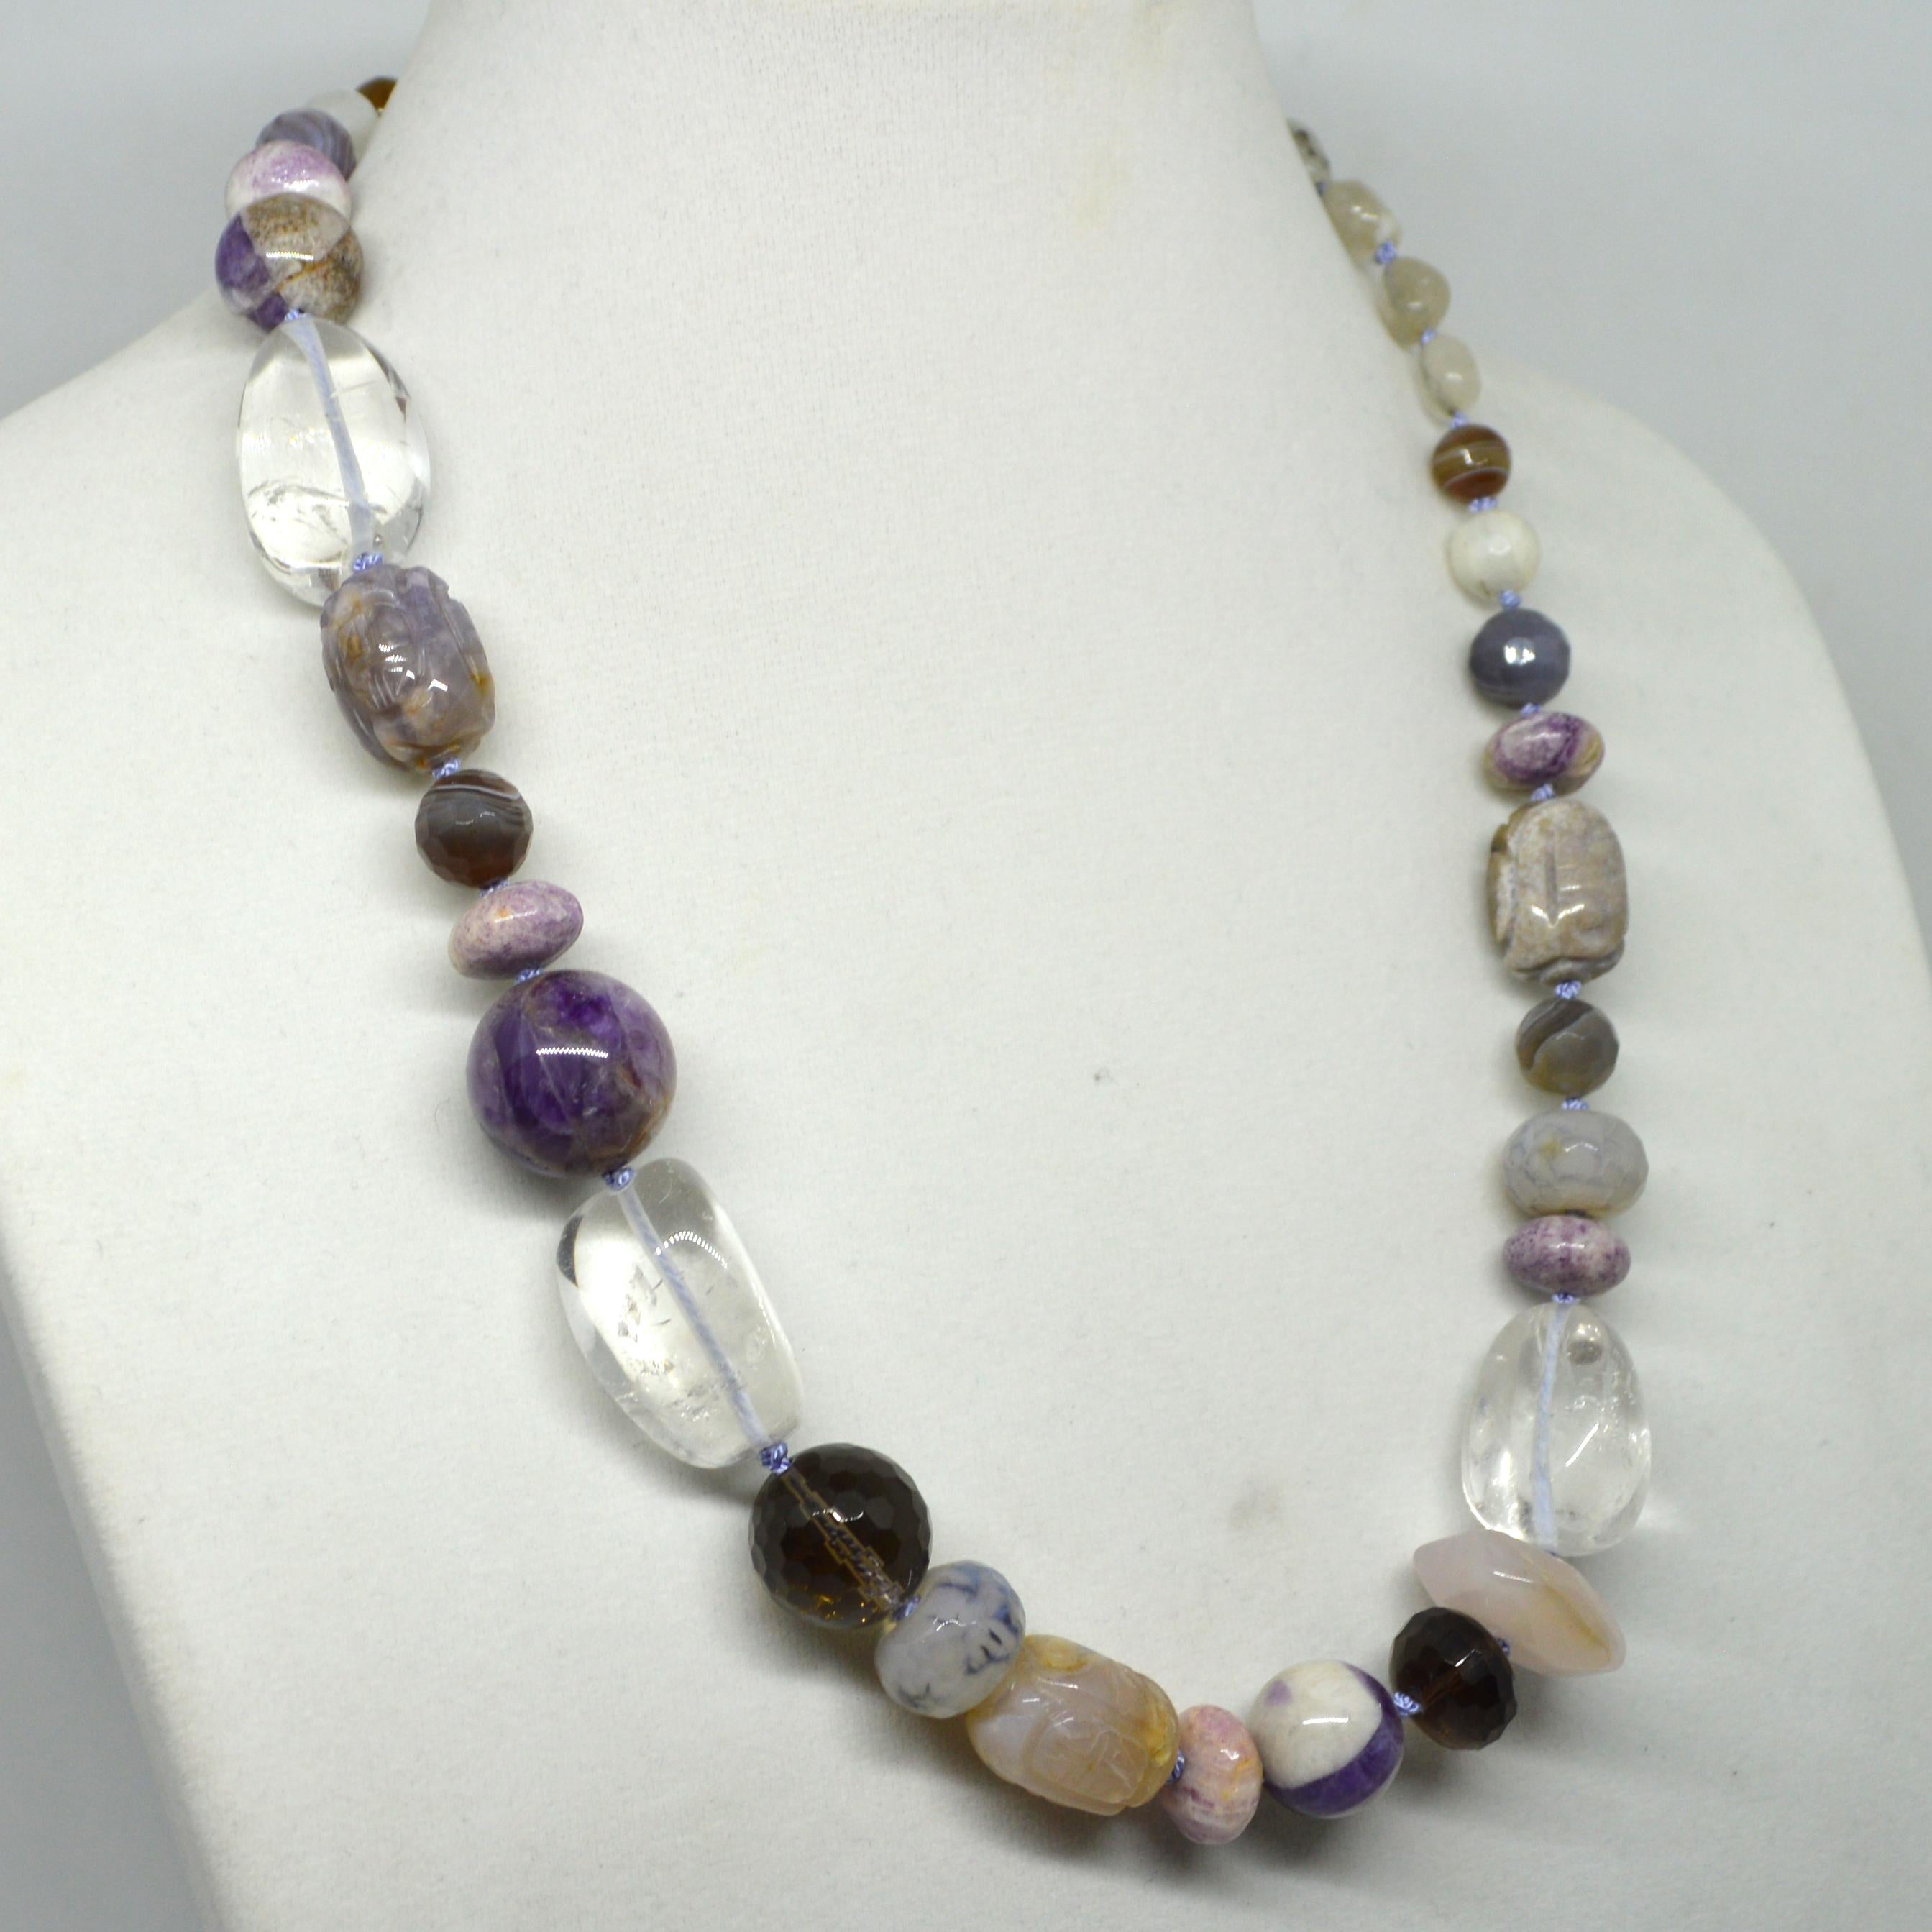 Mix of Carved Faceted and polished stones makes this beautiful necklace.
Stones included are Moonstone, Botswania Agate, Banded amethyst, Smokey Quartz, Rose Quartz, Clear Quartz and Carved Agate with a Sterling Silver Clasp.
 Finished Necklace